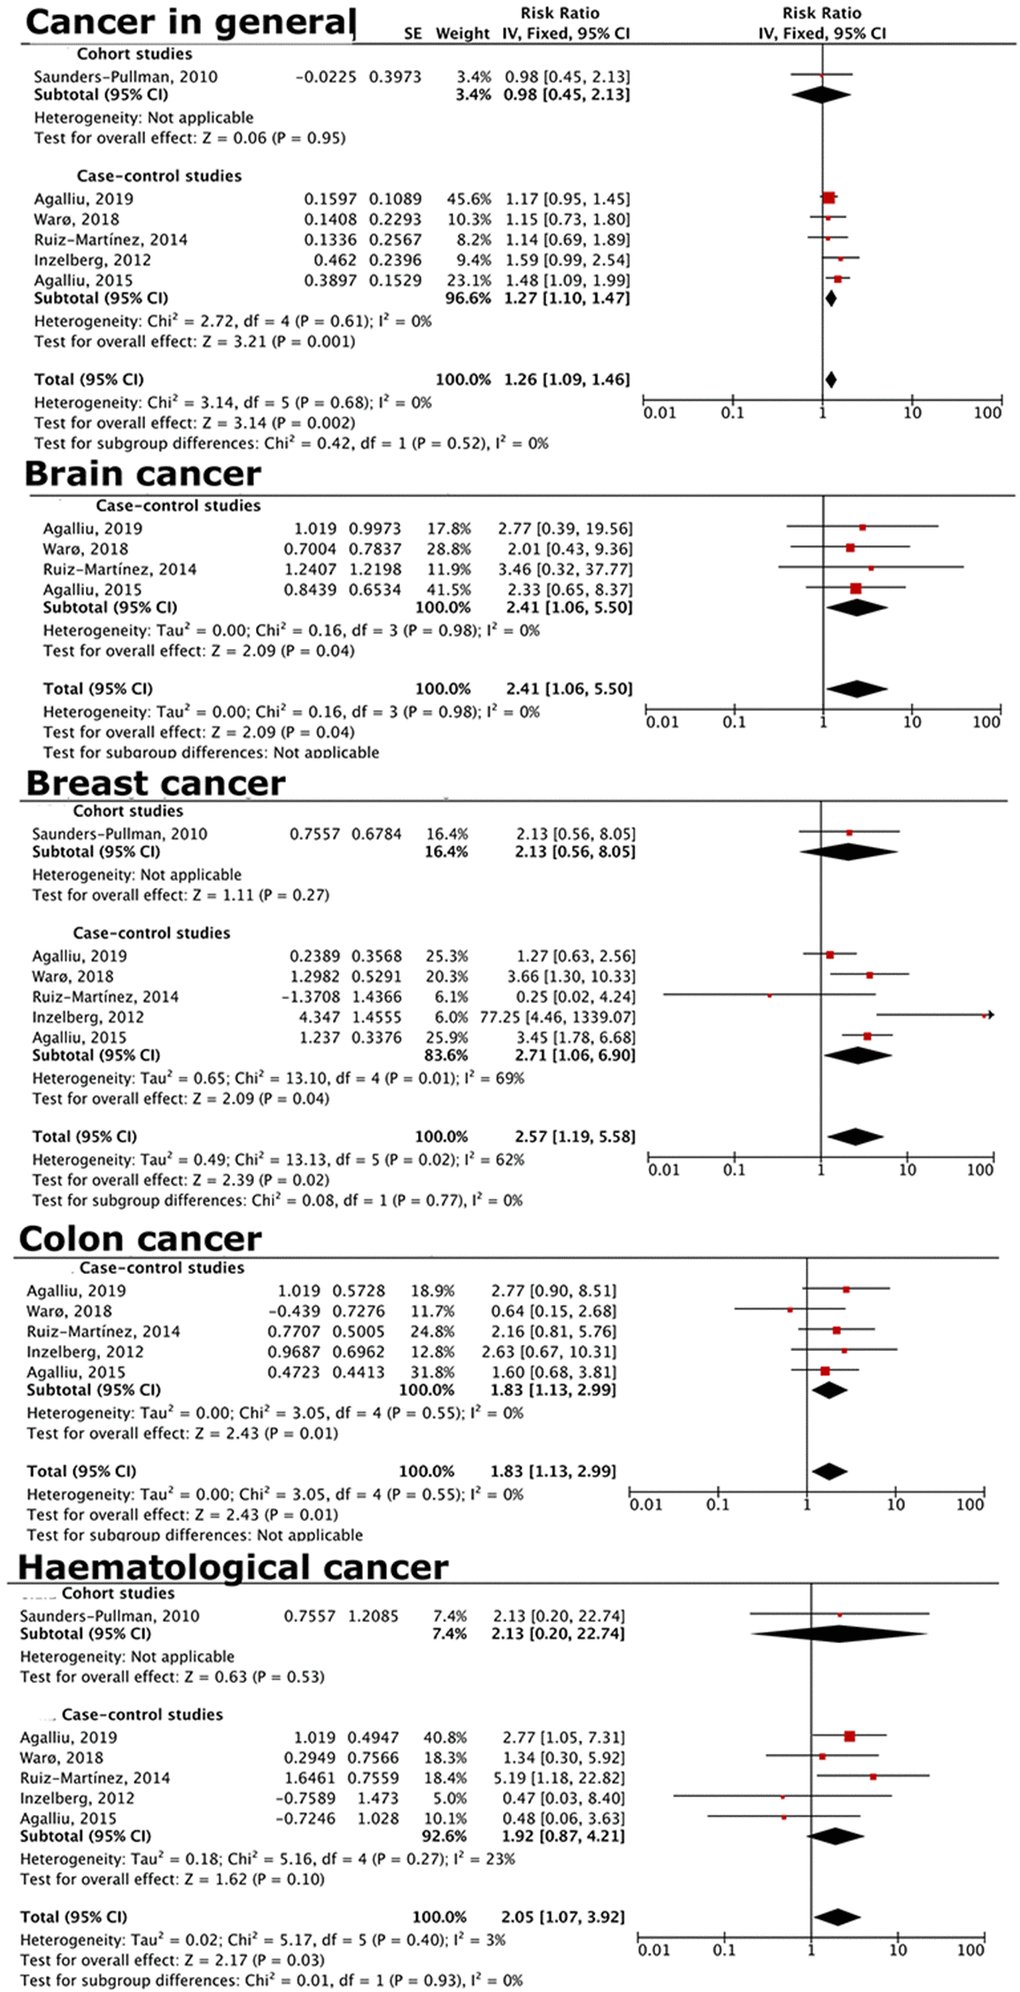 Forest plot comparing risks of cancer in general and specific cancers for LRRK2-PD vs. idiopathic PD patients. LRRK2-PD patients had higher risk of overall cancer, as well as brain, breast, colon, and hematological cancers.